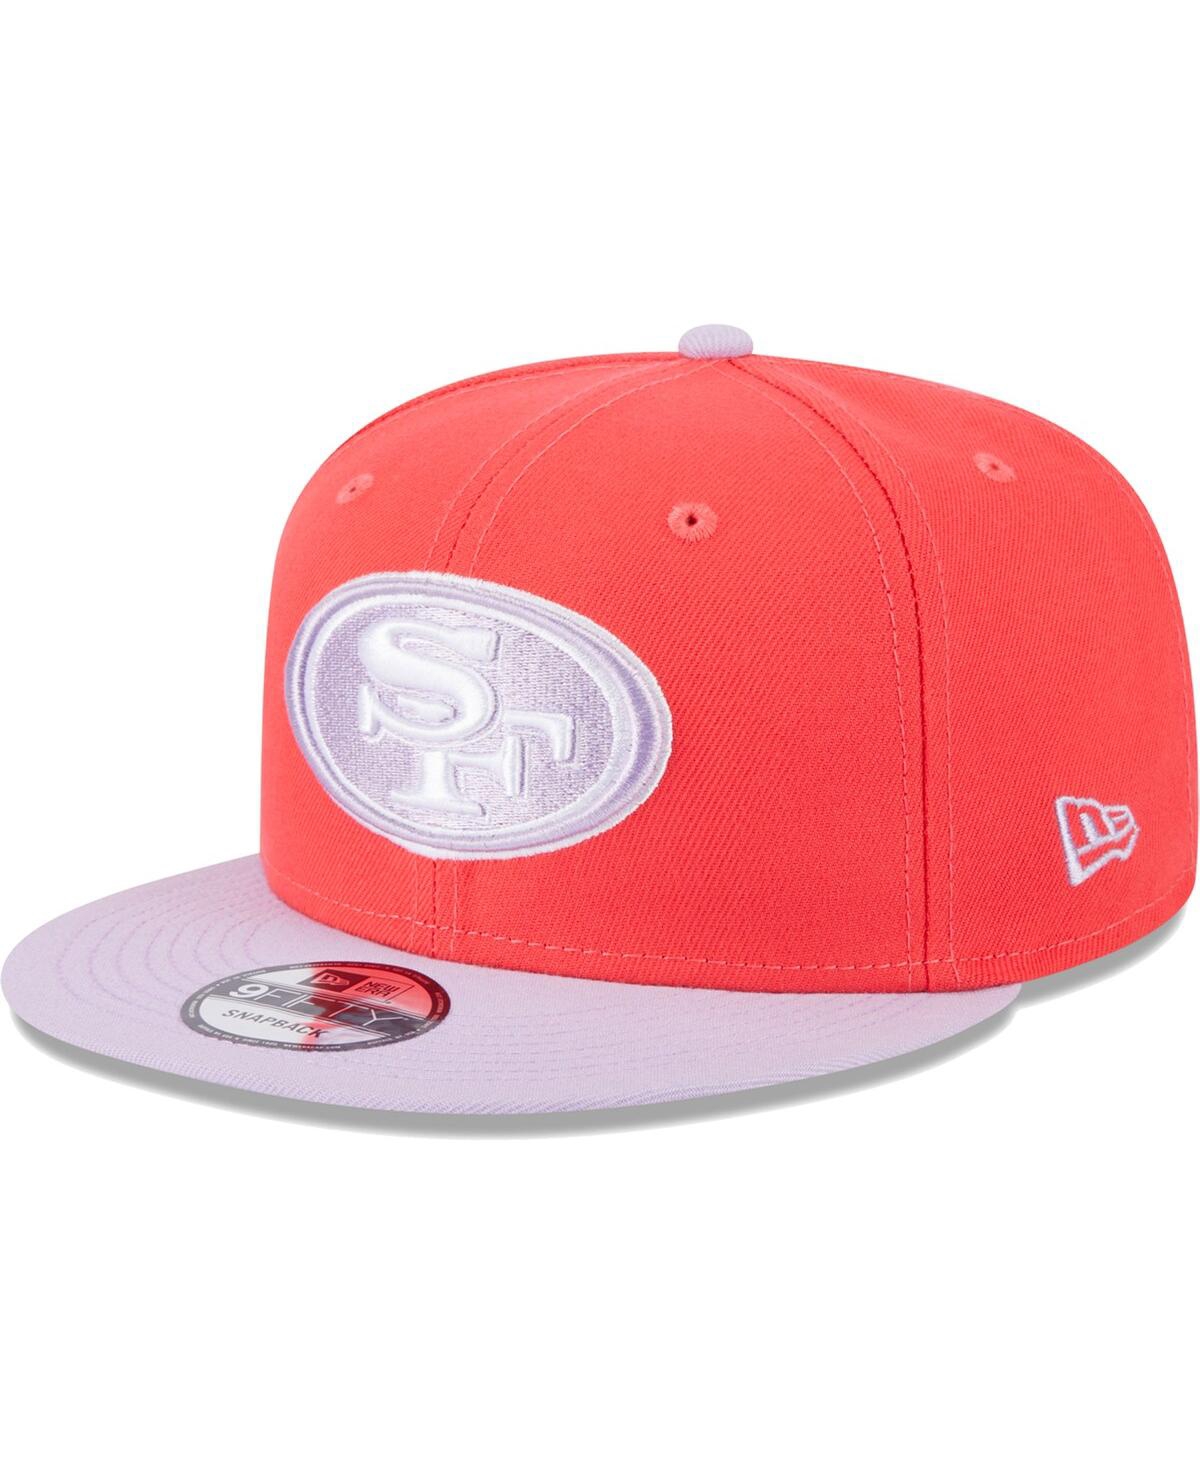 New Era Men's New Era Red, Lavender San Francisco 49ers Two-Tone Color Pack 9FIFTY  Snapback Hat - Red, Lavender